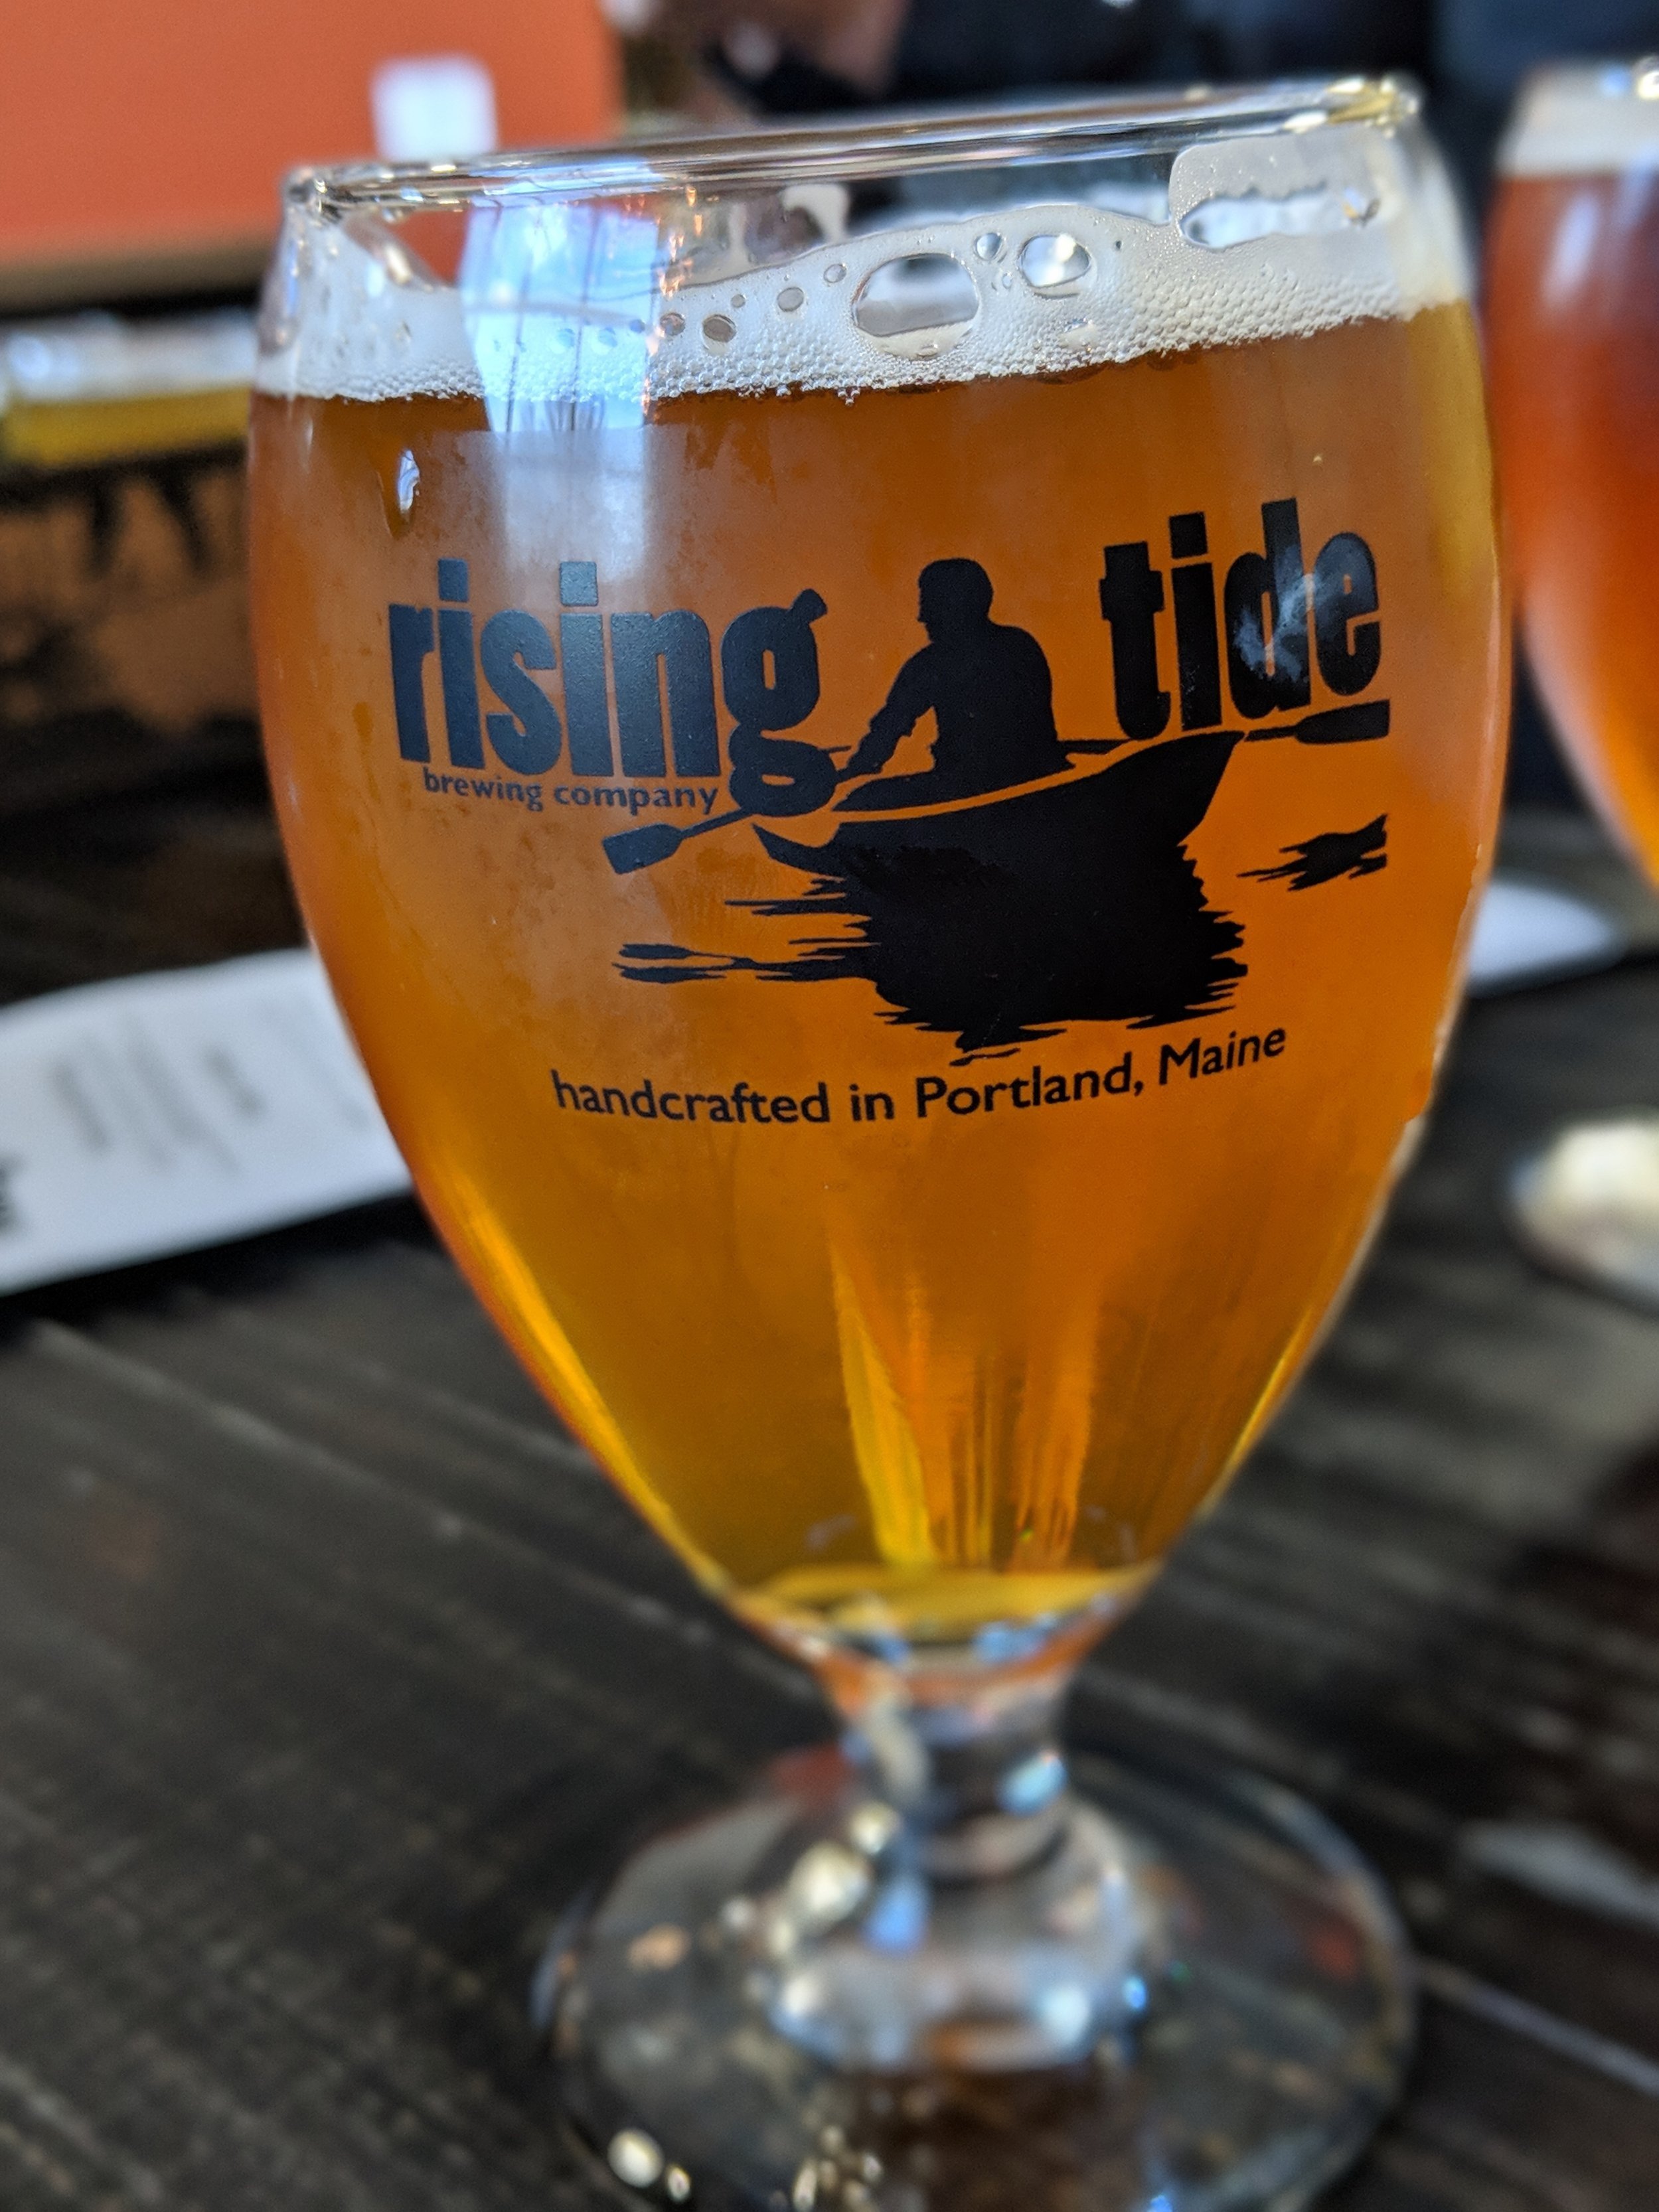 rising tide brewery in portland maine